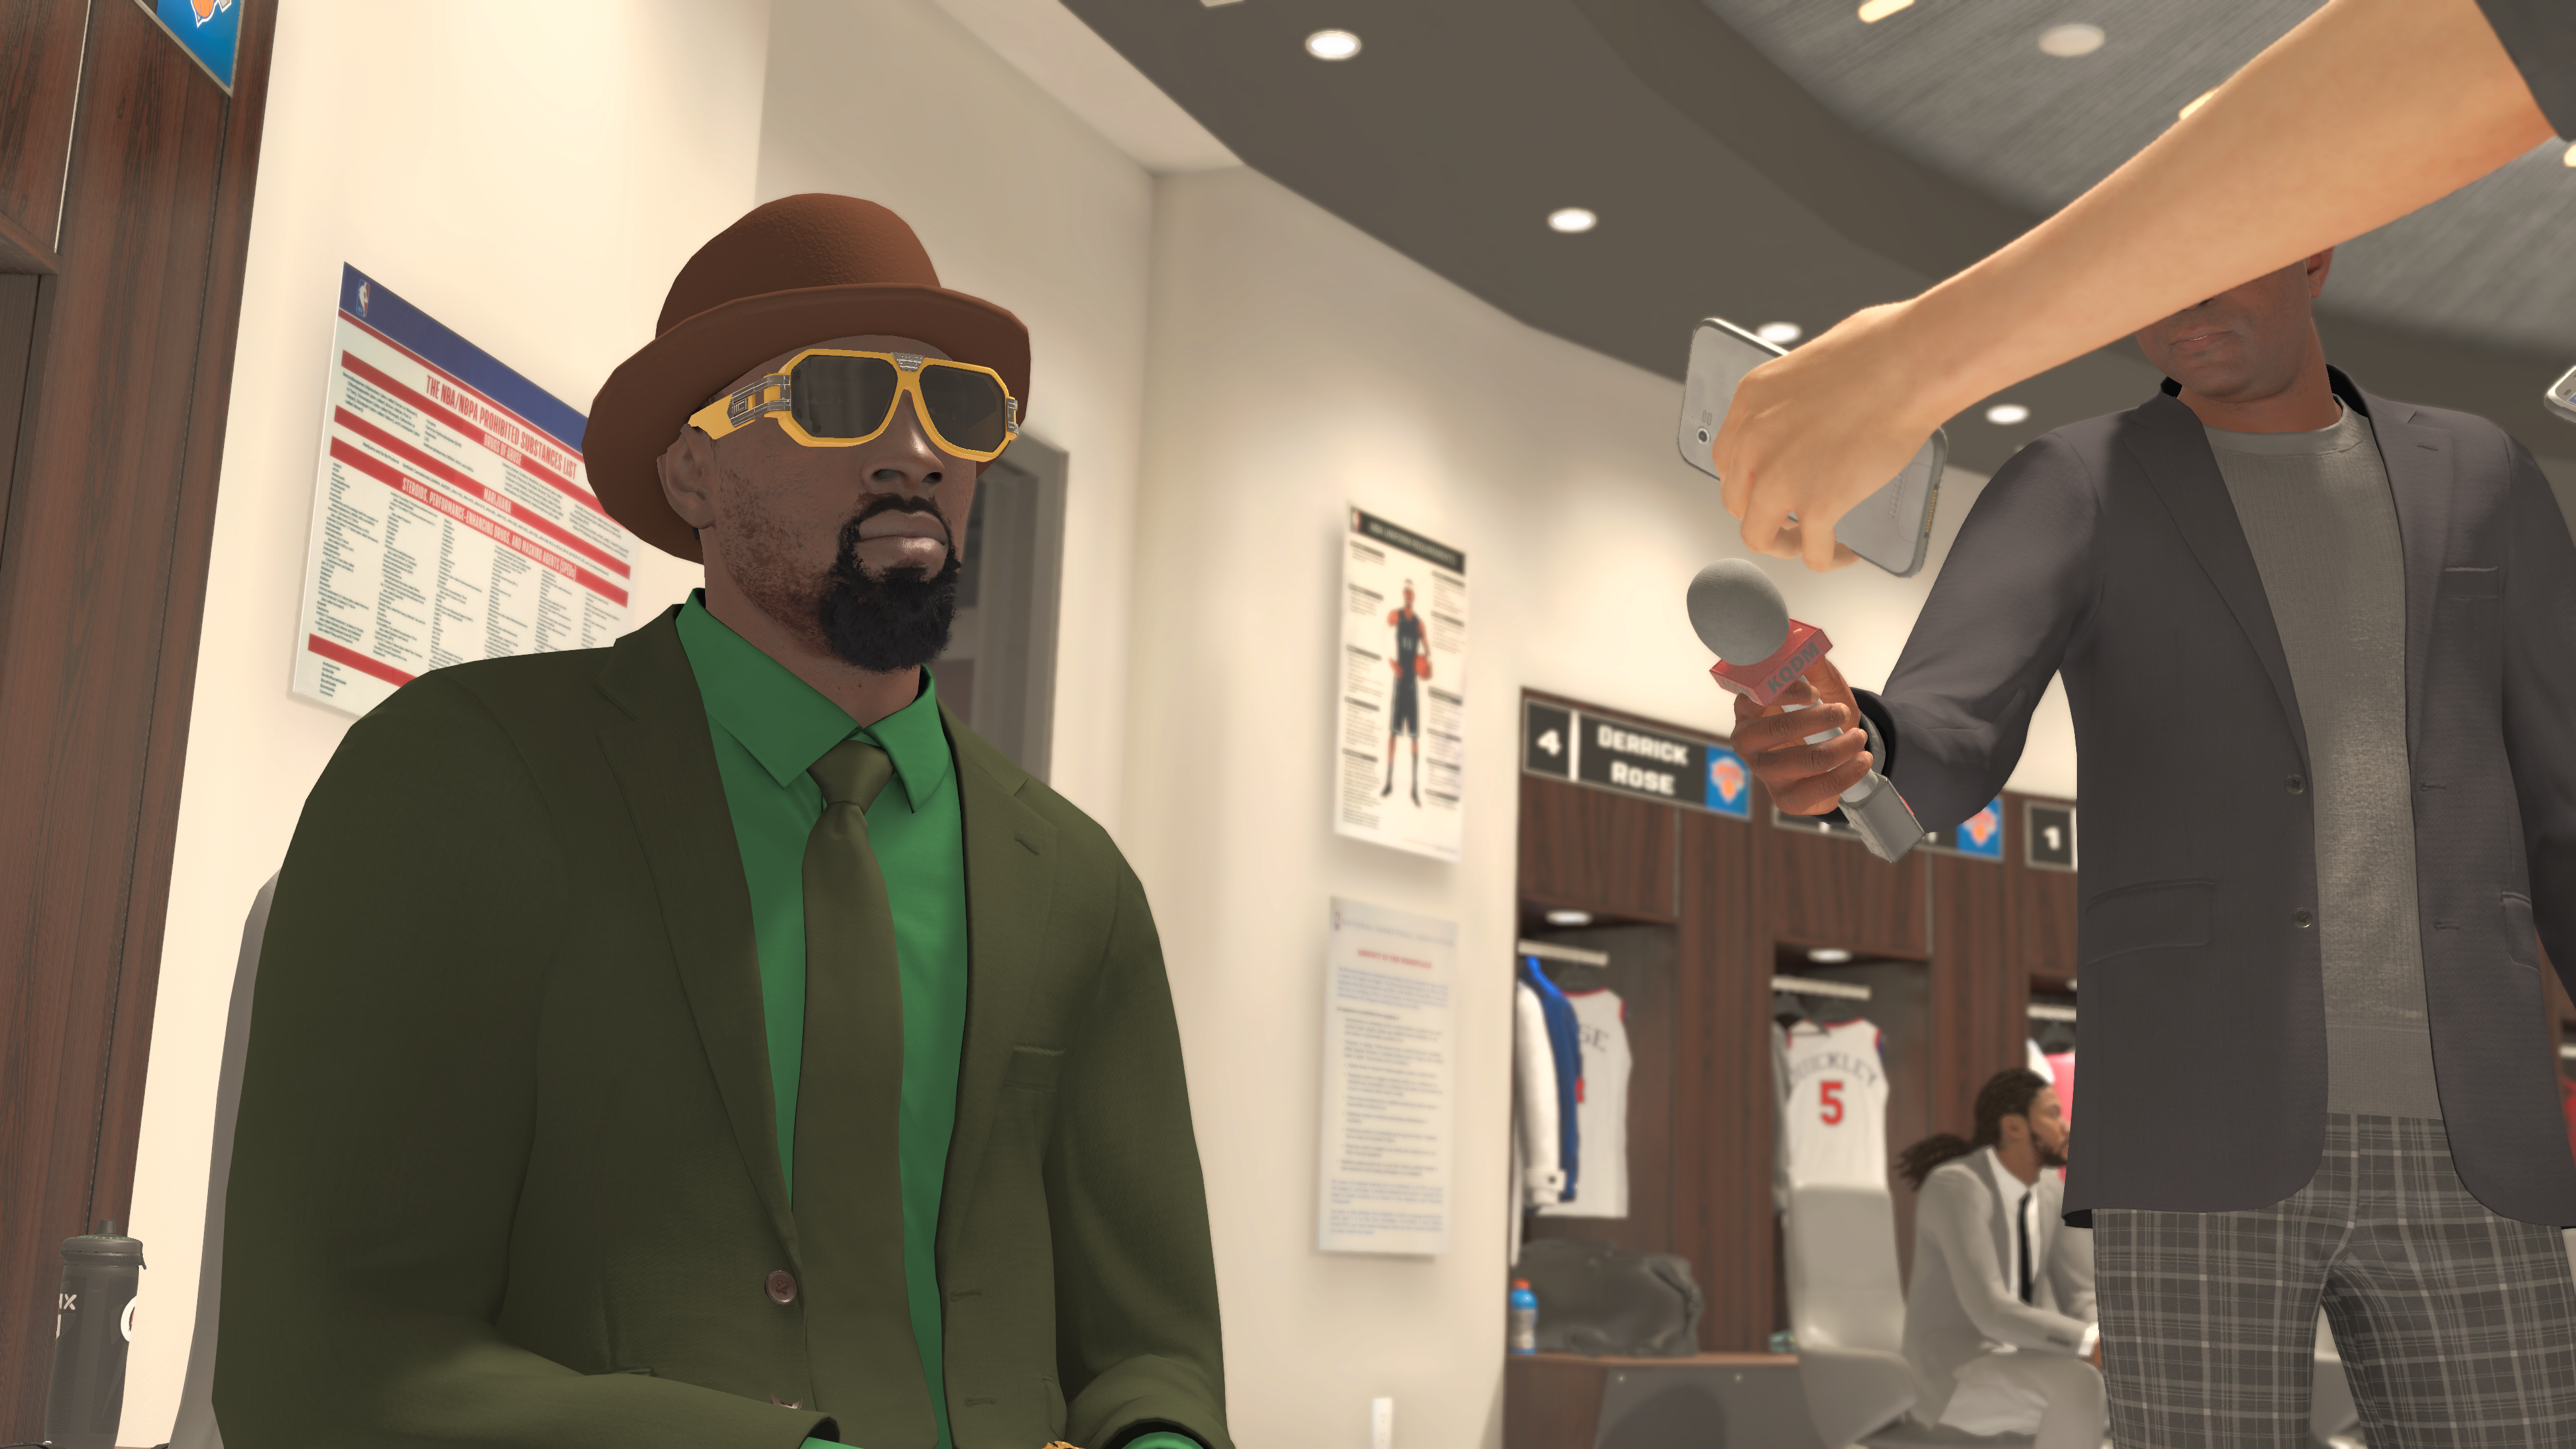 The player character, dressed entirely in green (with a pair of fabulous gold-rimmed sunglasses) speaks to the media in his locker room in NBA 2K23.